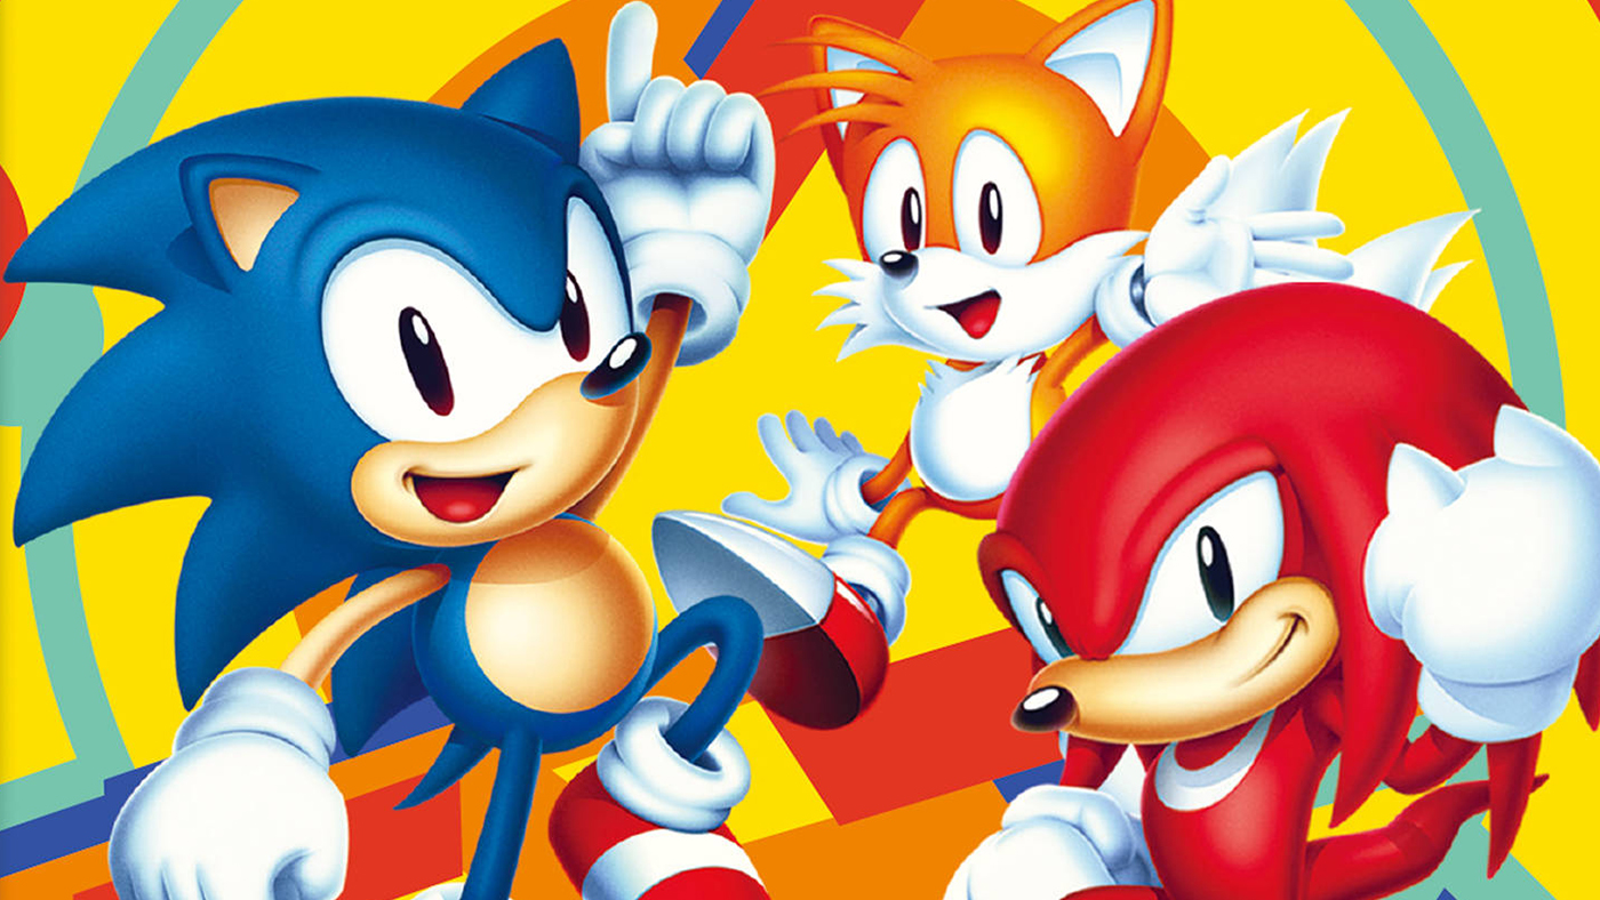 A New Plus Version Of Sonic Origins May Be On The Way - GameSpot